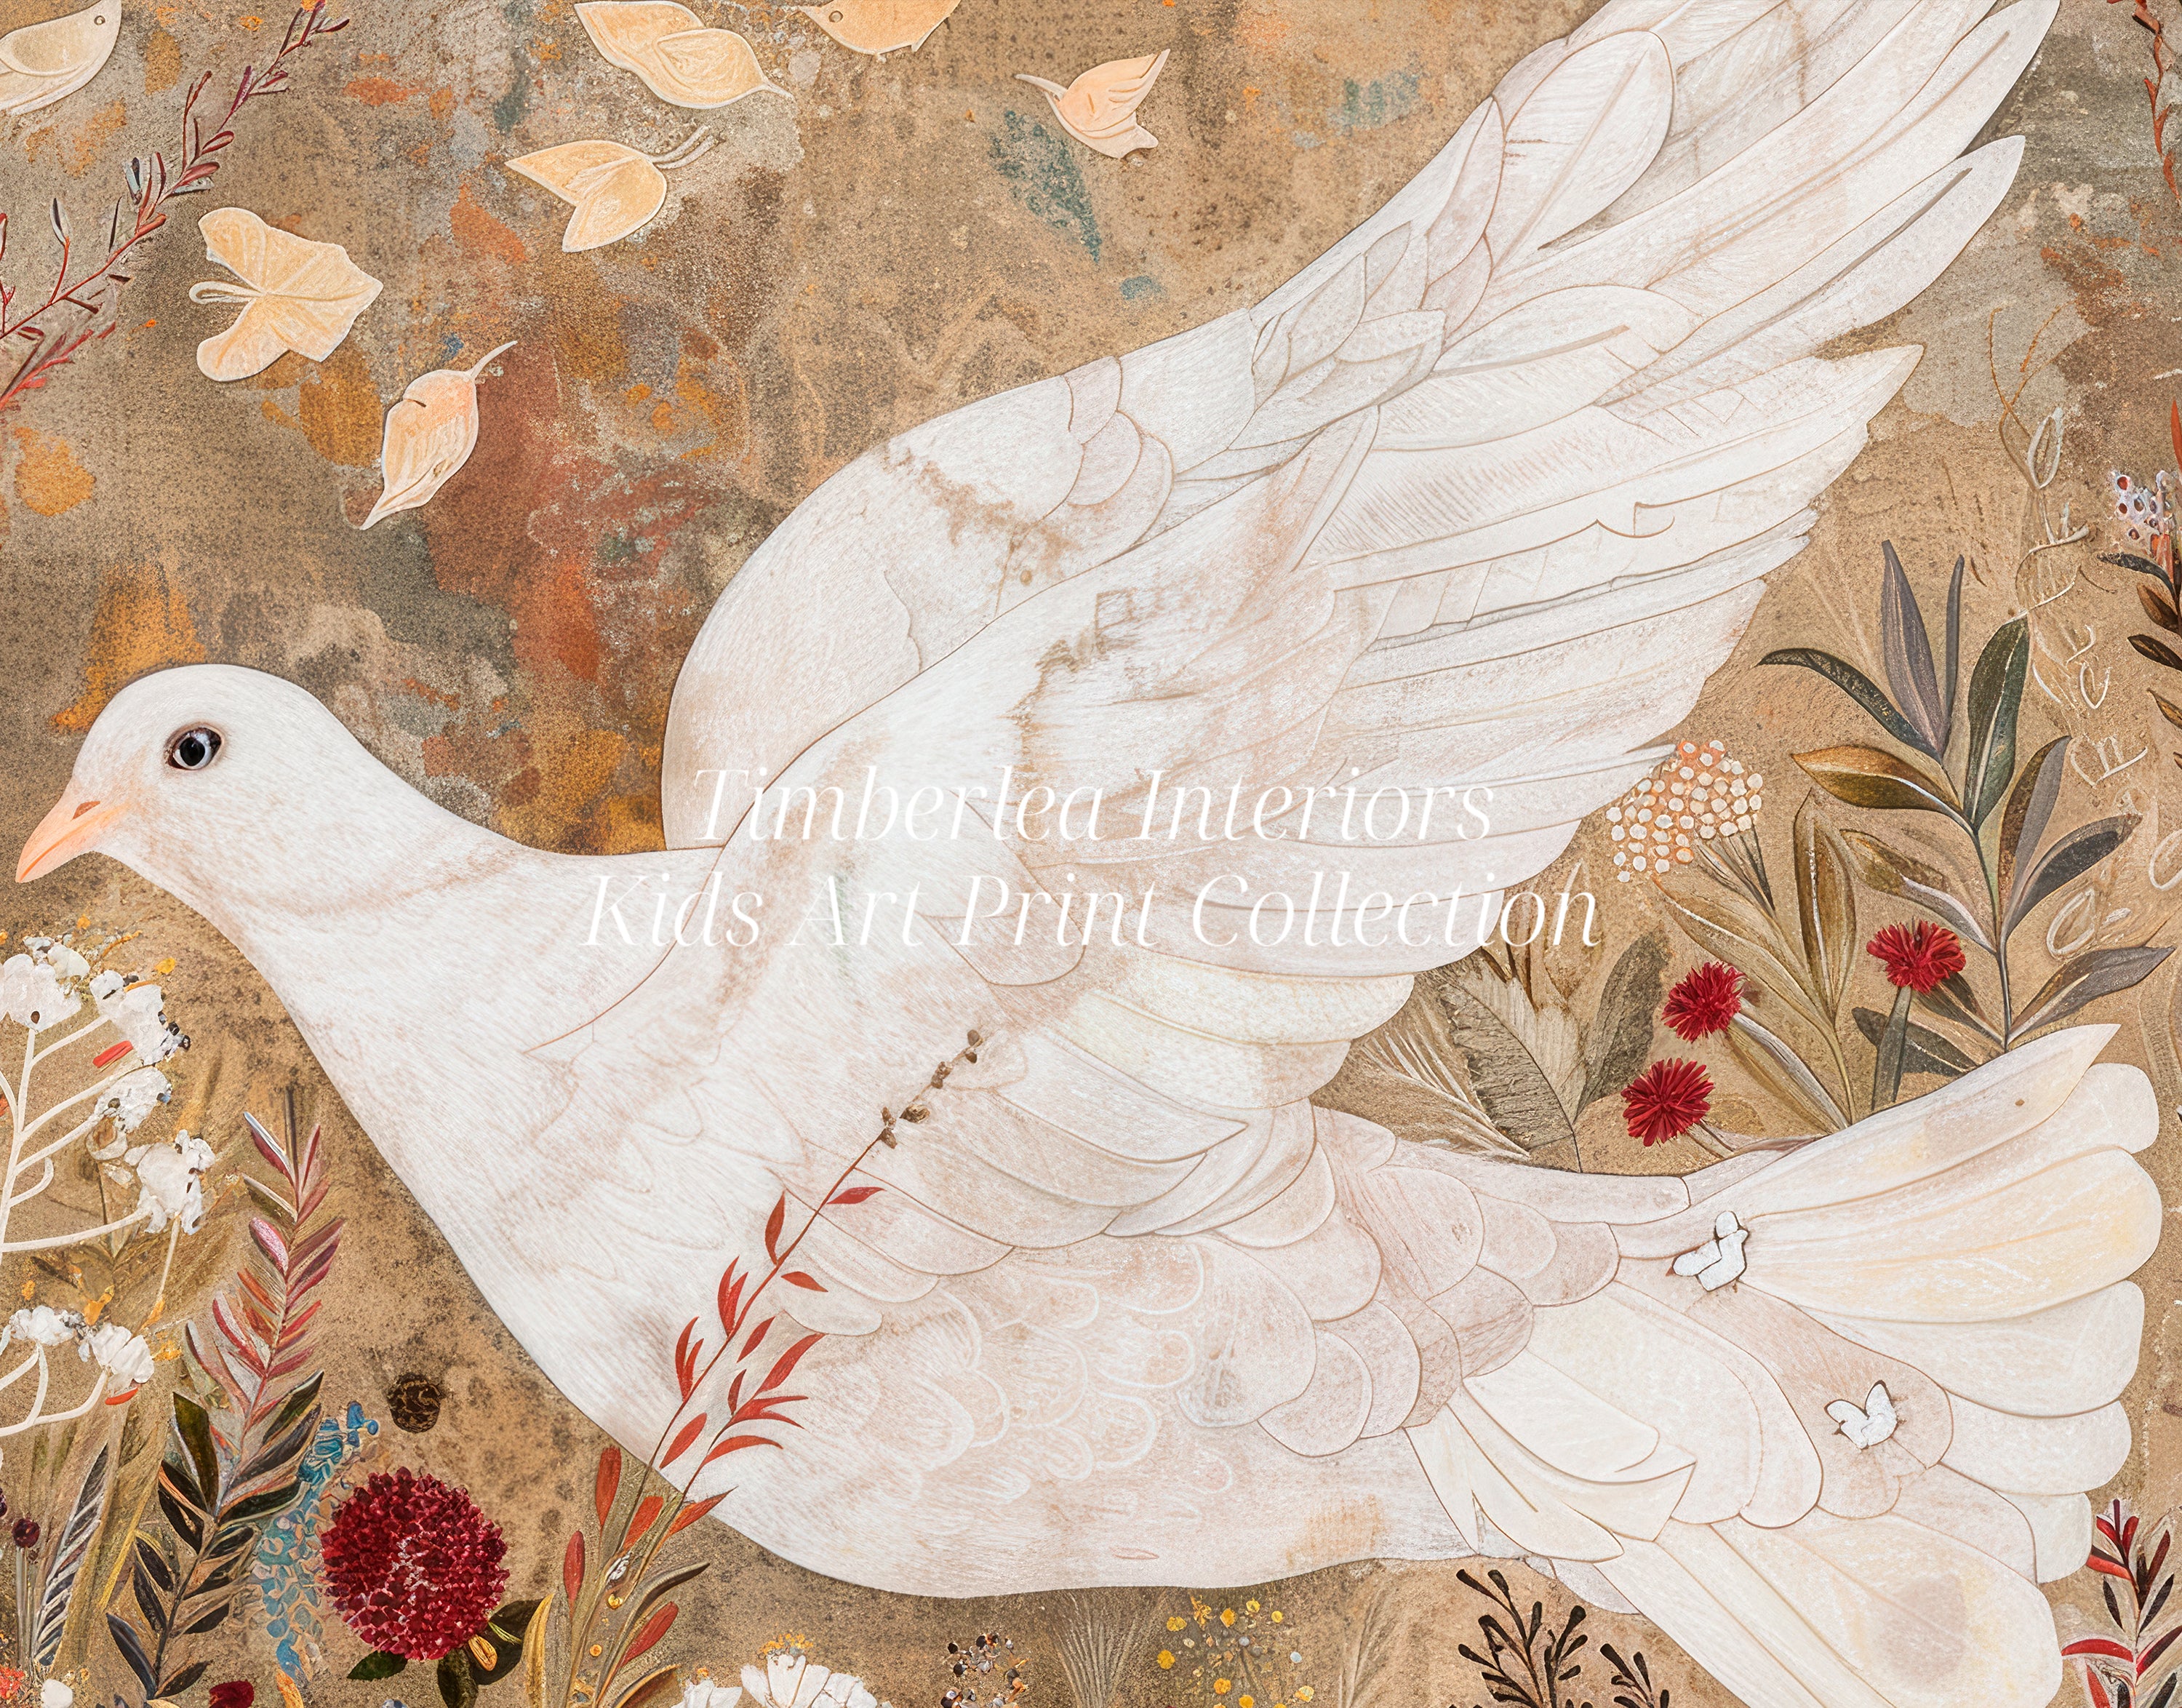 Serene Dove Art Print framed in an elegant gold frame, showcasing a beautifully detailed white dove in mid-flight with botanical elements on an earthy background